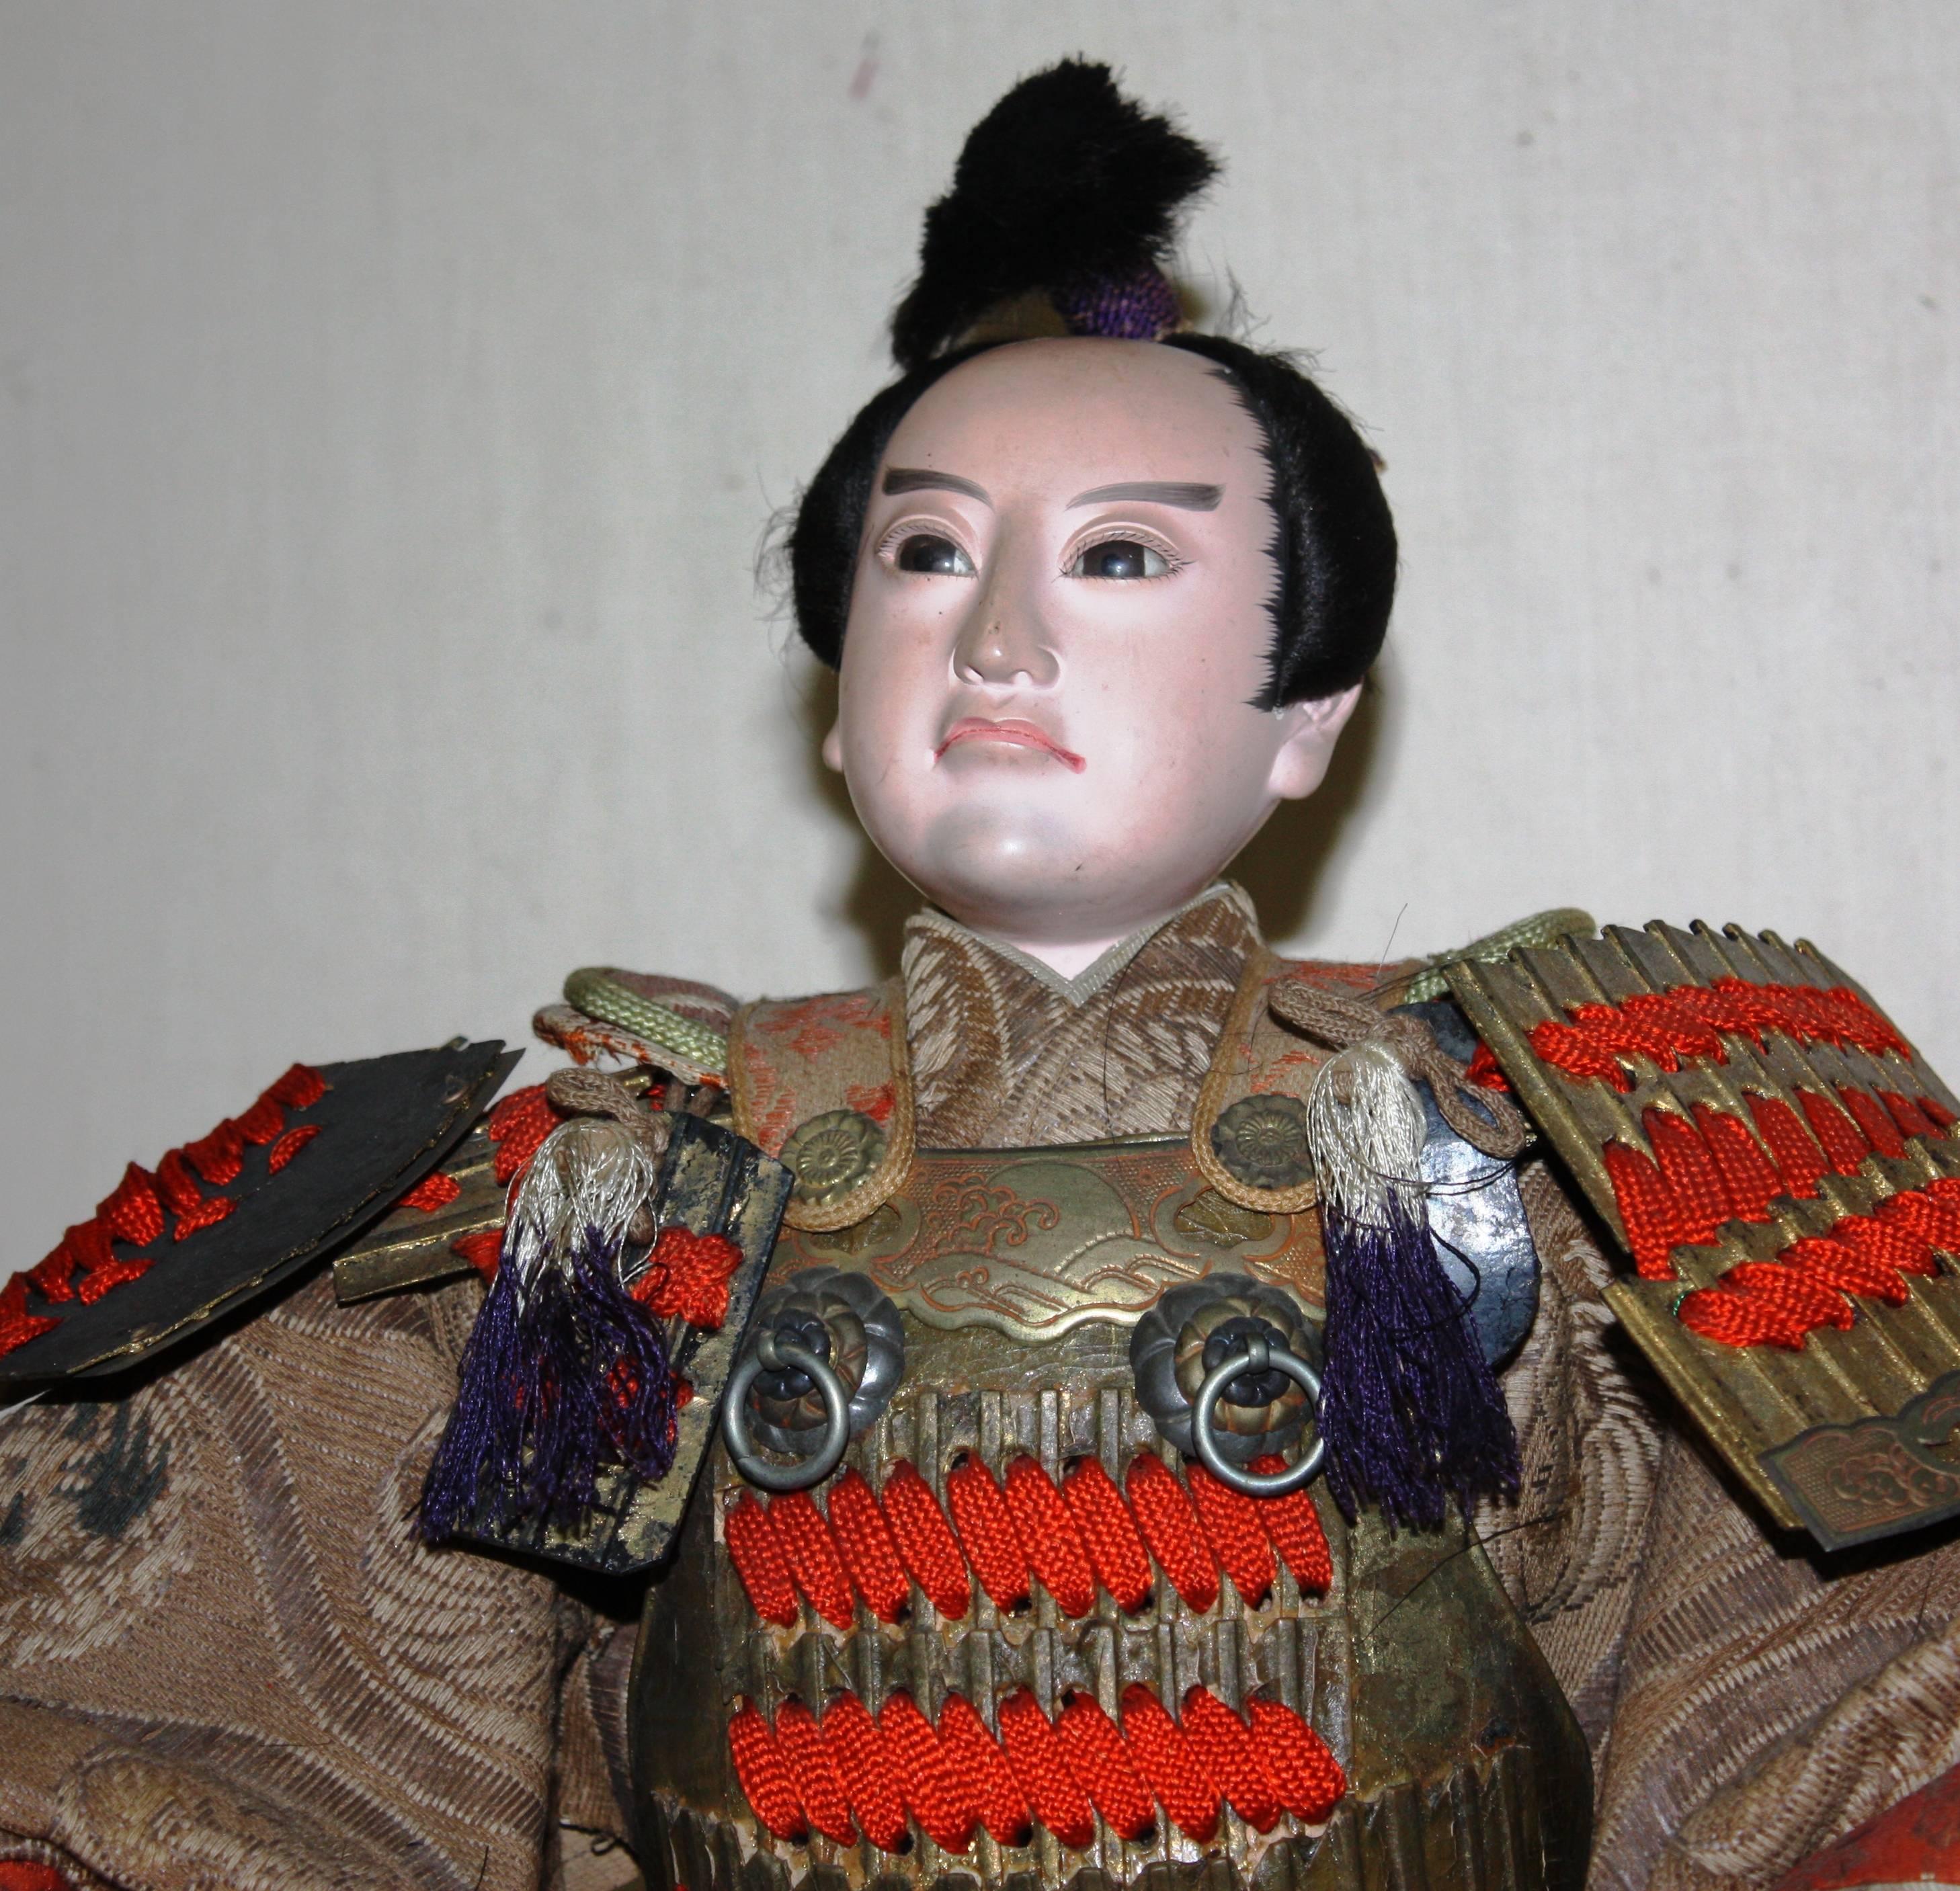 A Japanese samurai doll, Meiji period, late 19th century, with porcelain face and hands, with armor and period costume.